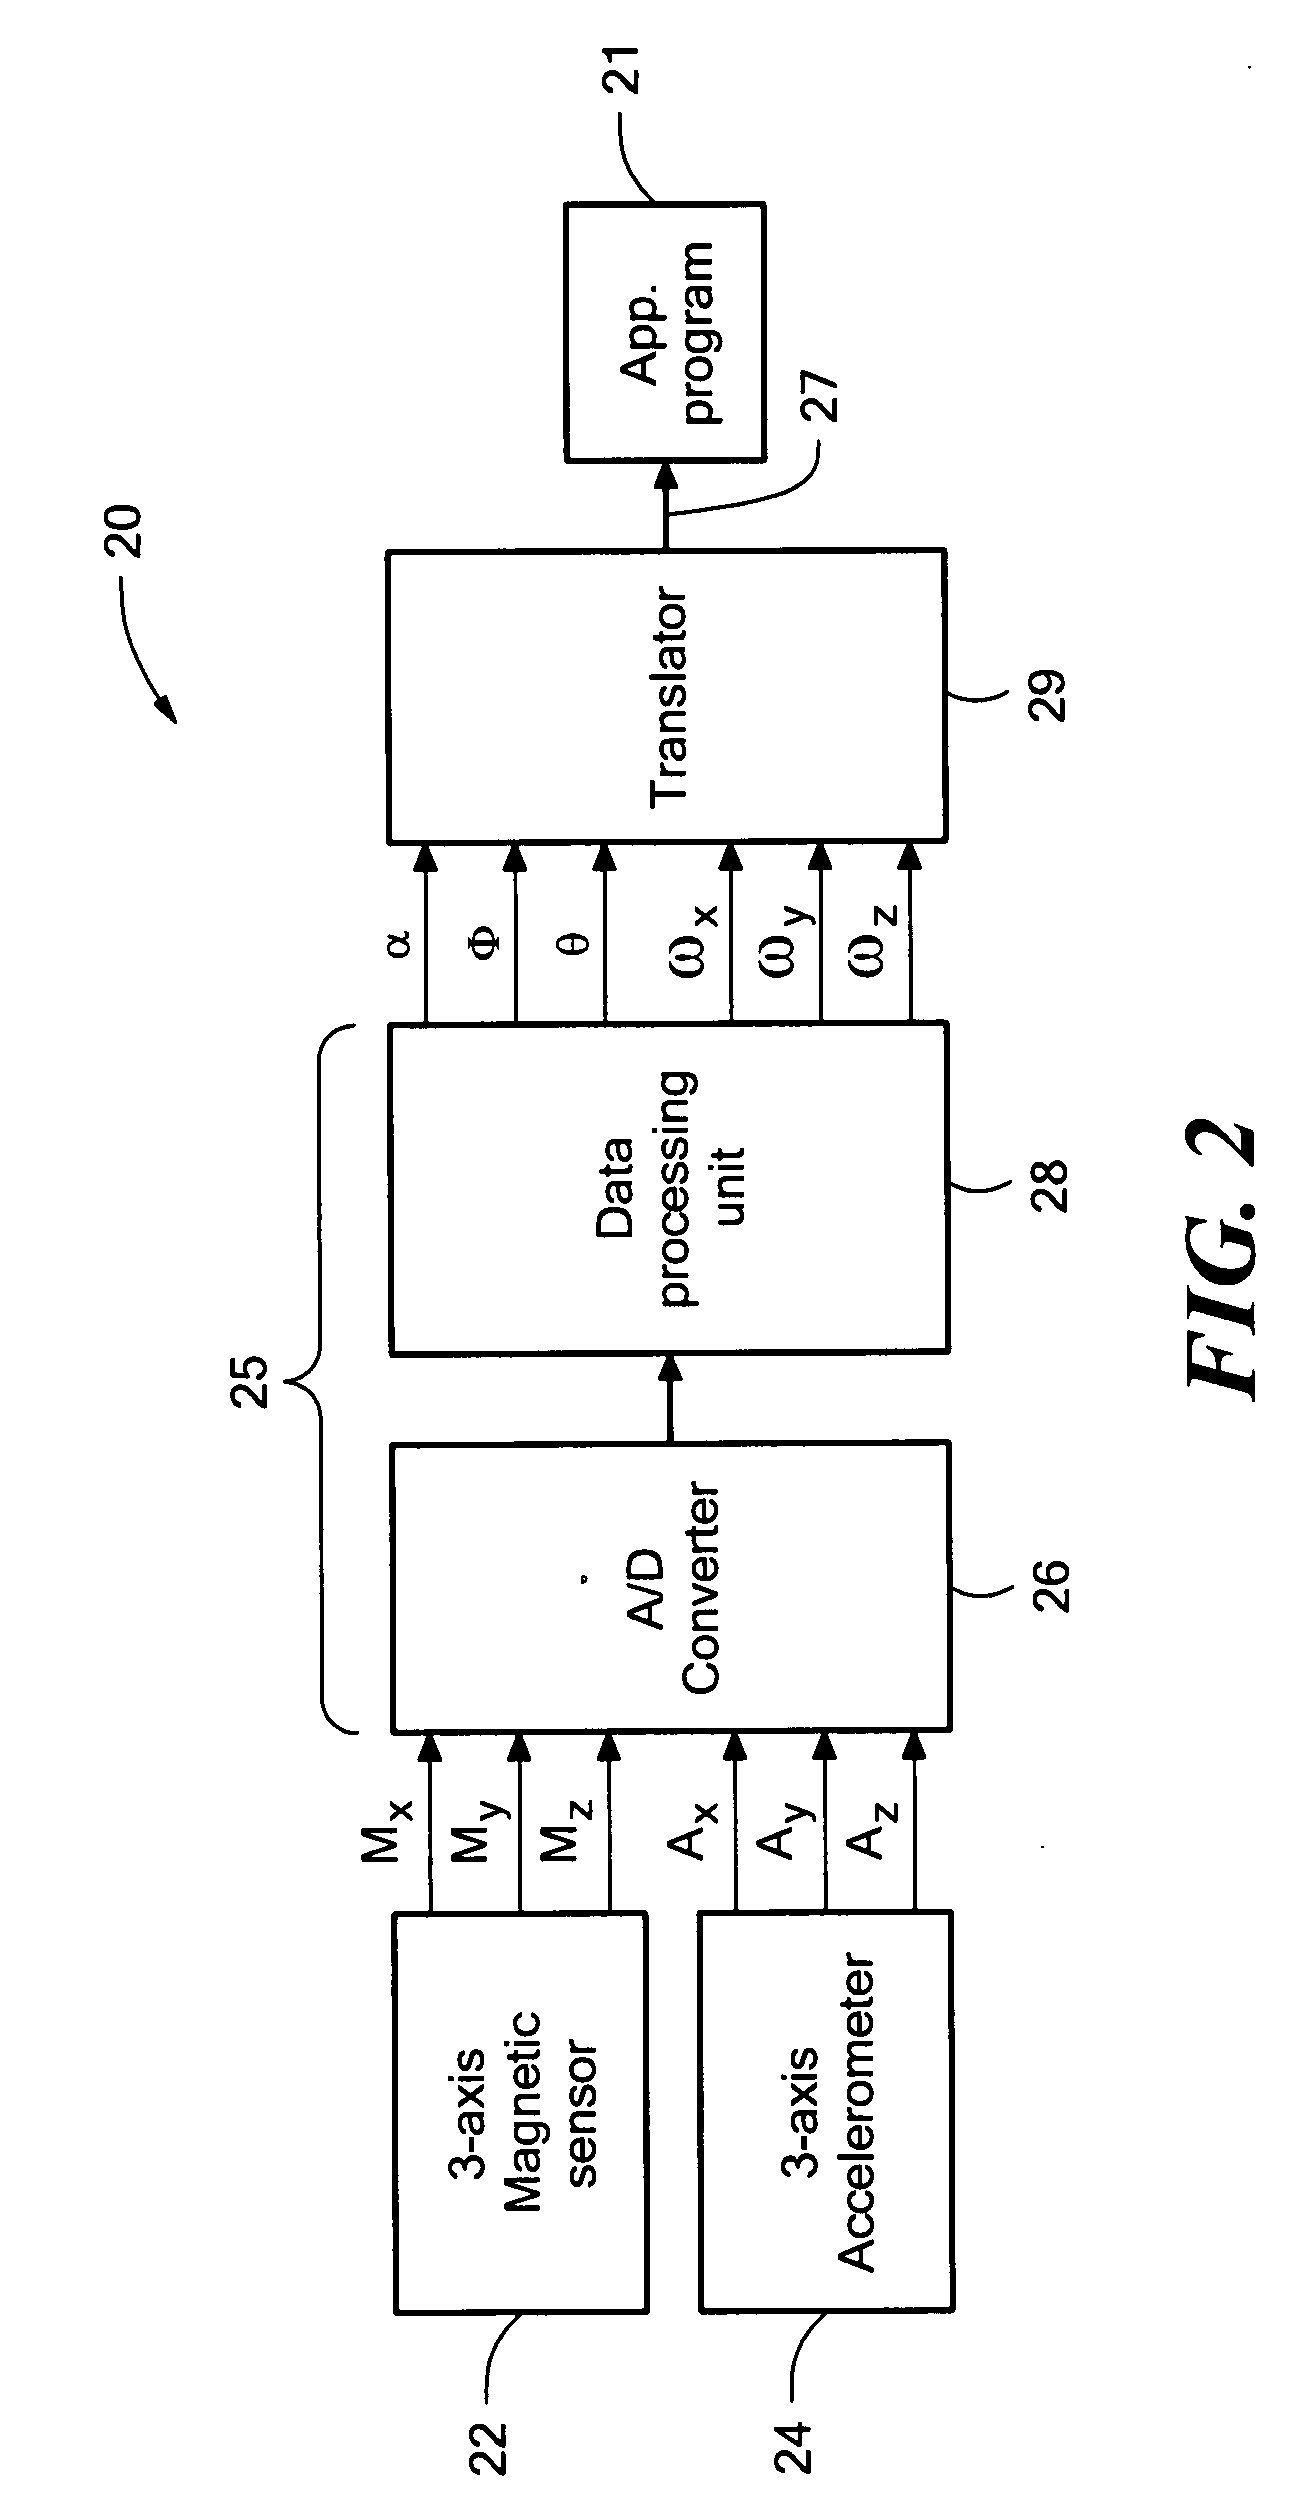 System for sensing yaw rate using a magnetic field sensor and portable electronic devices using the same